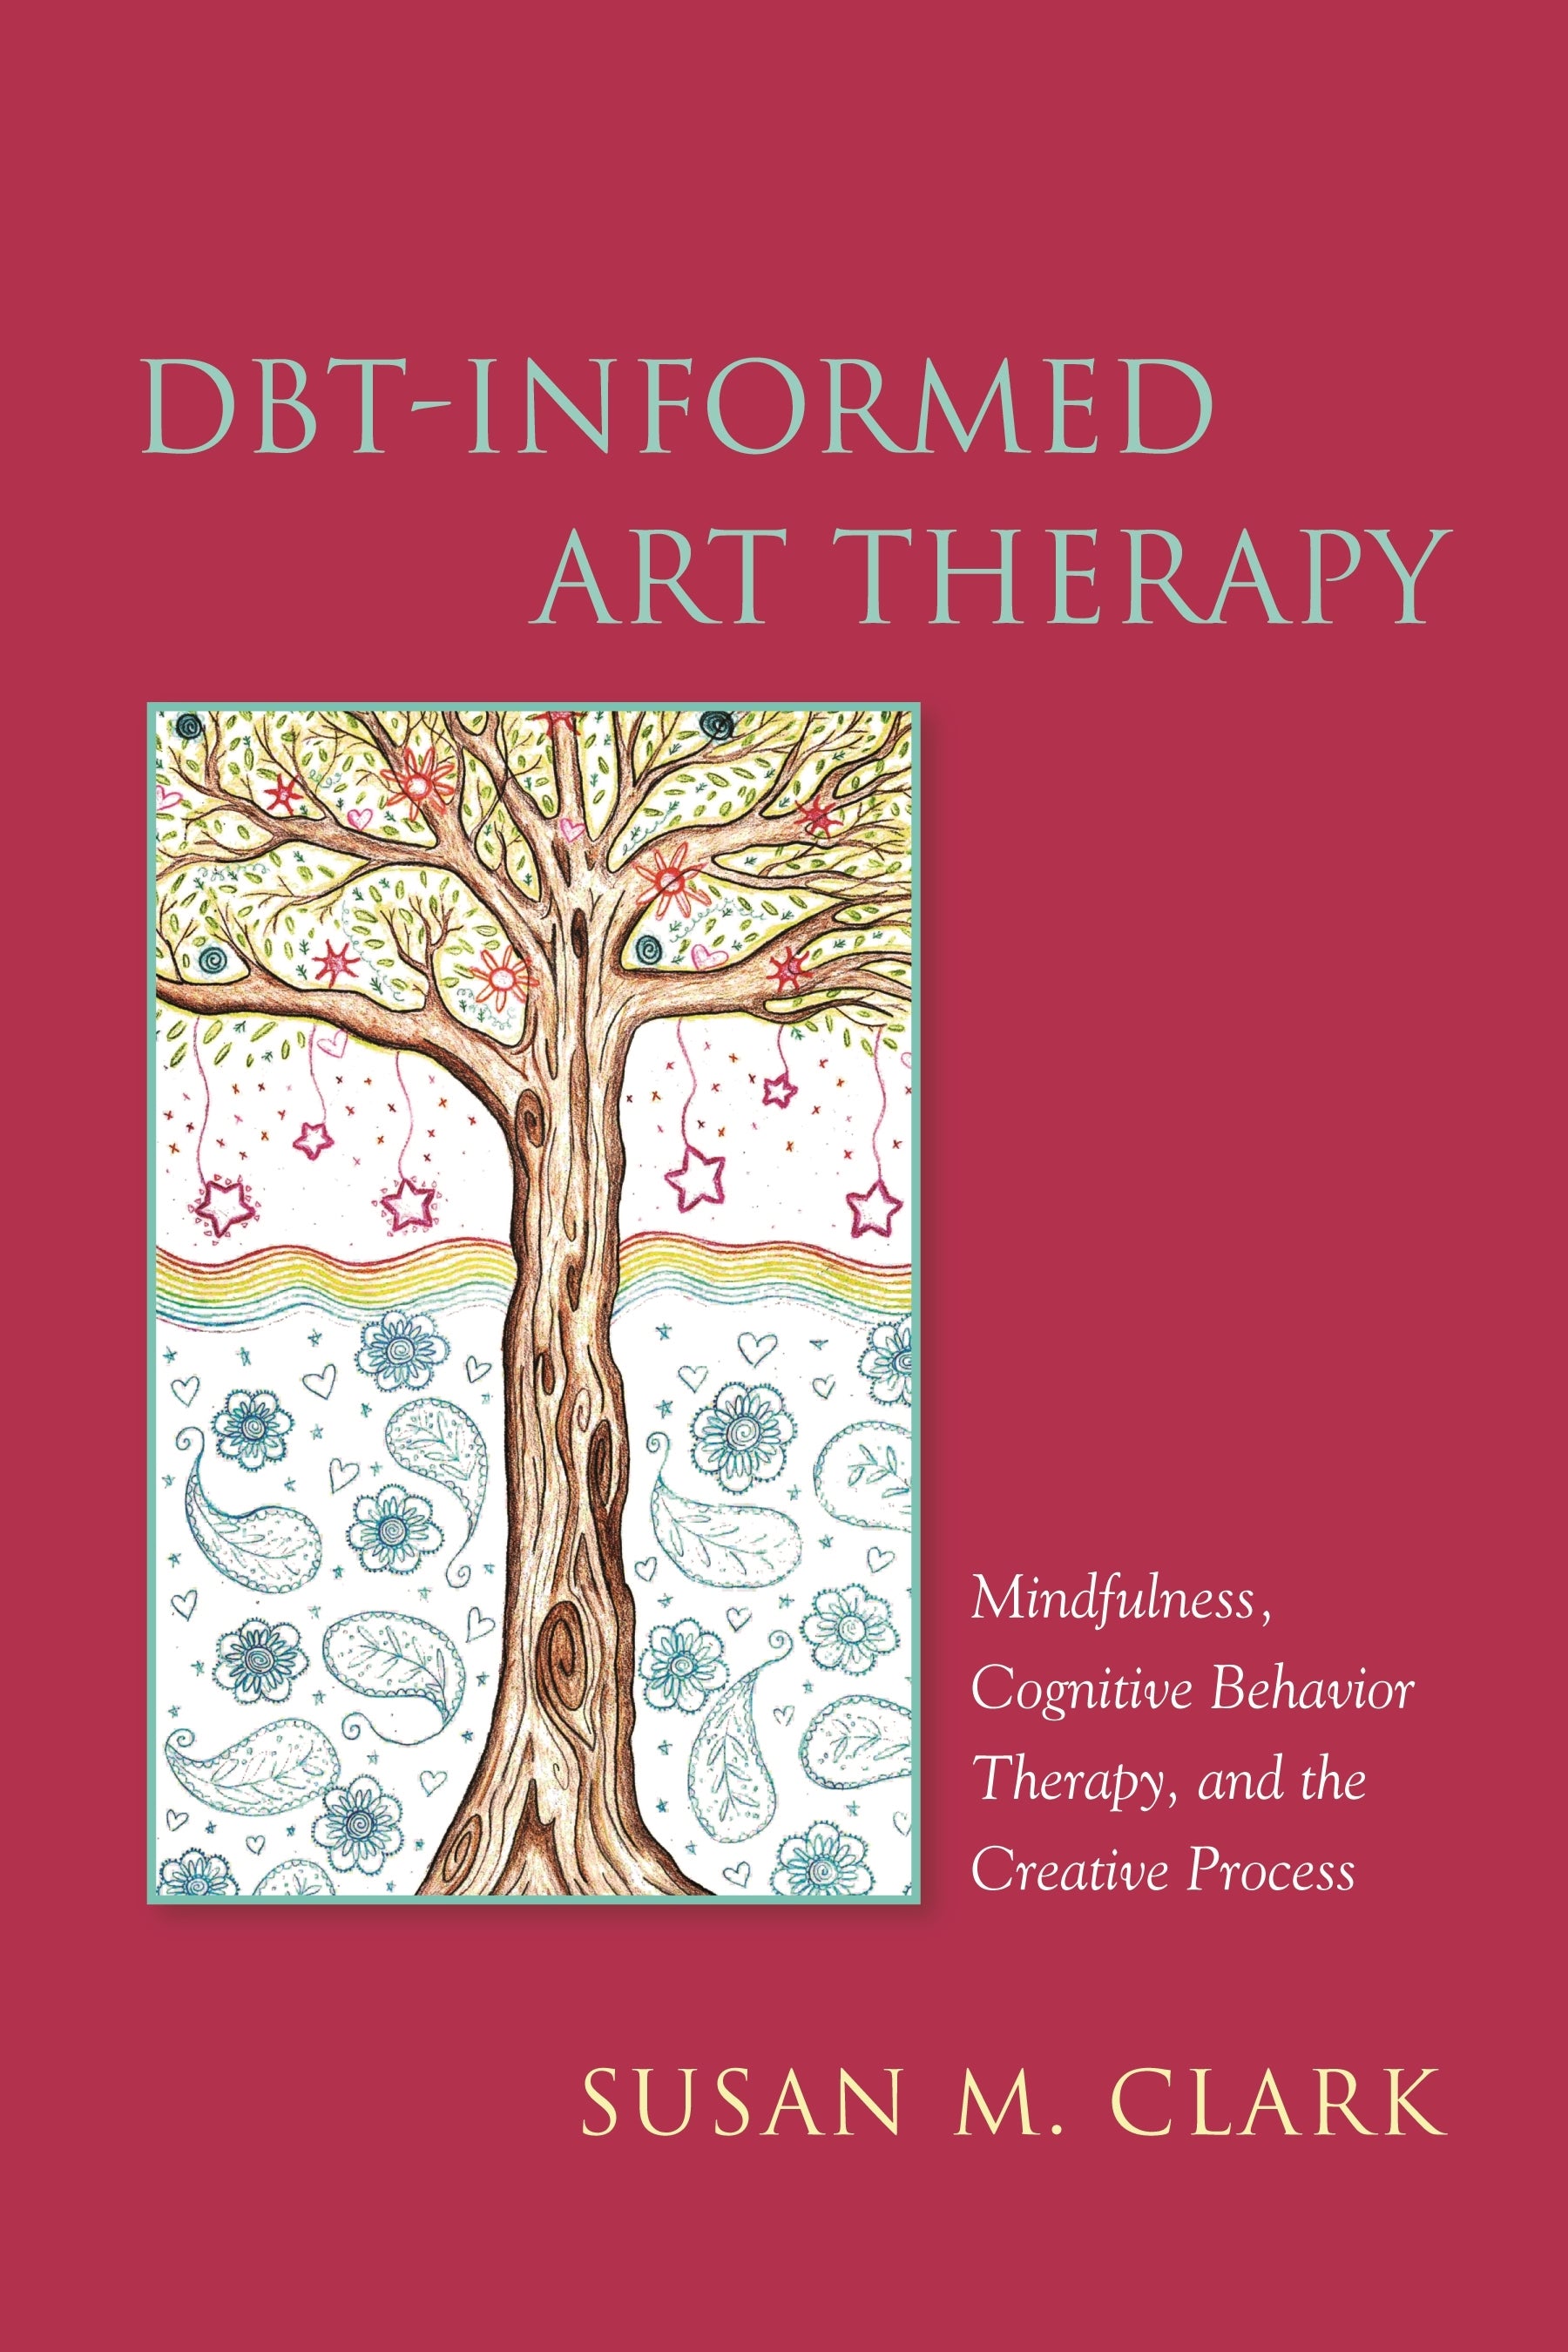 DBT-Informed Art Therapy by Susan M. Clark